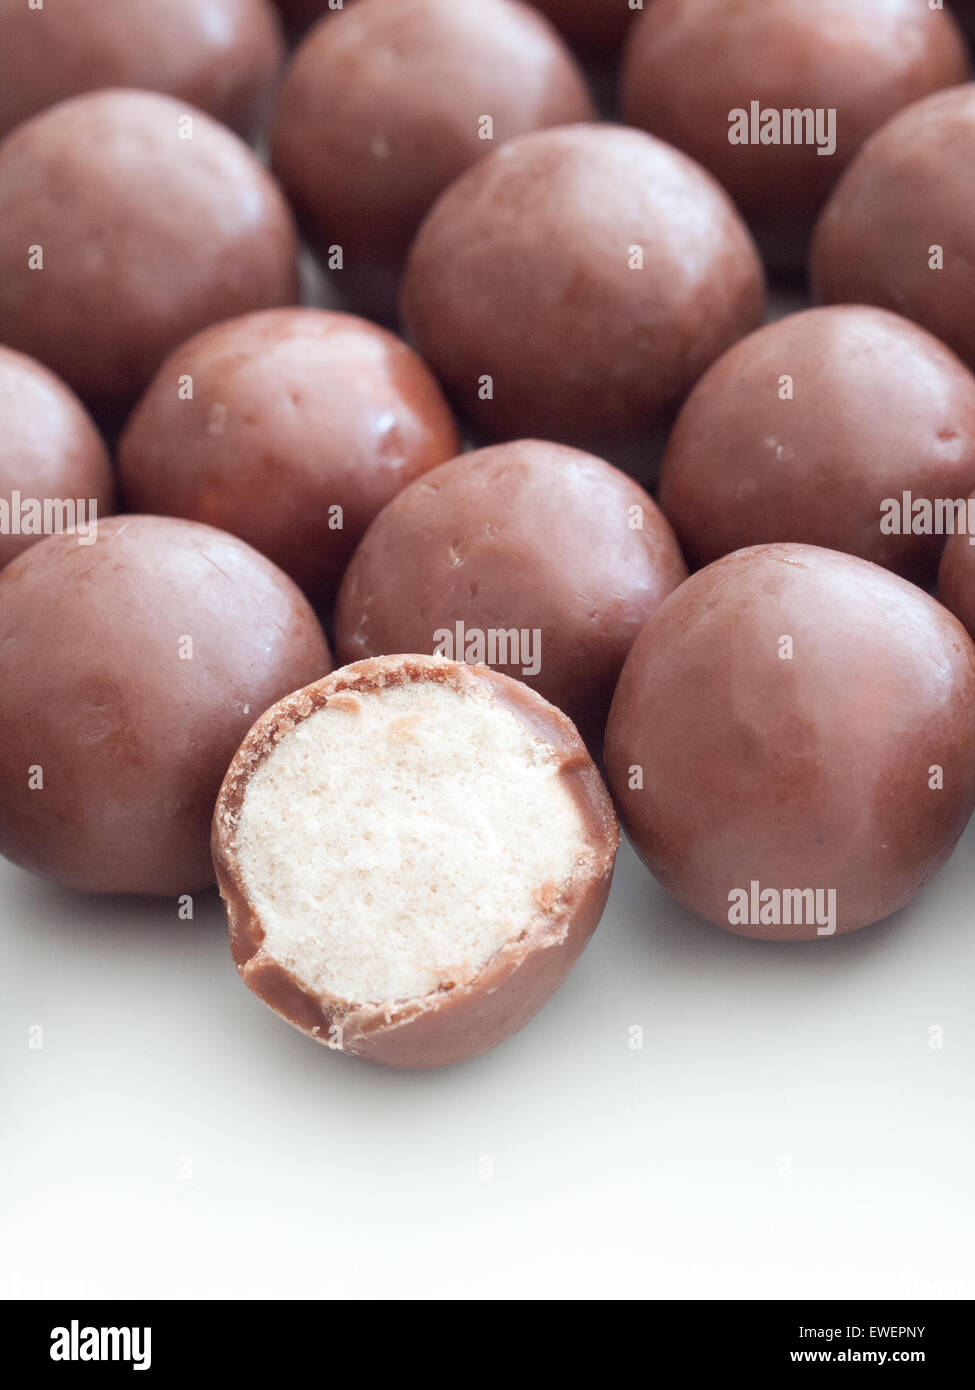 https://c8.alamy.com/comp/EWEPNY/a-close-up-of-whoppers-candy-whoppers-are-malted-milk-balls-covered-EWEPNY.jpg